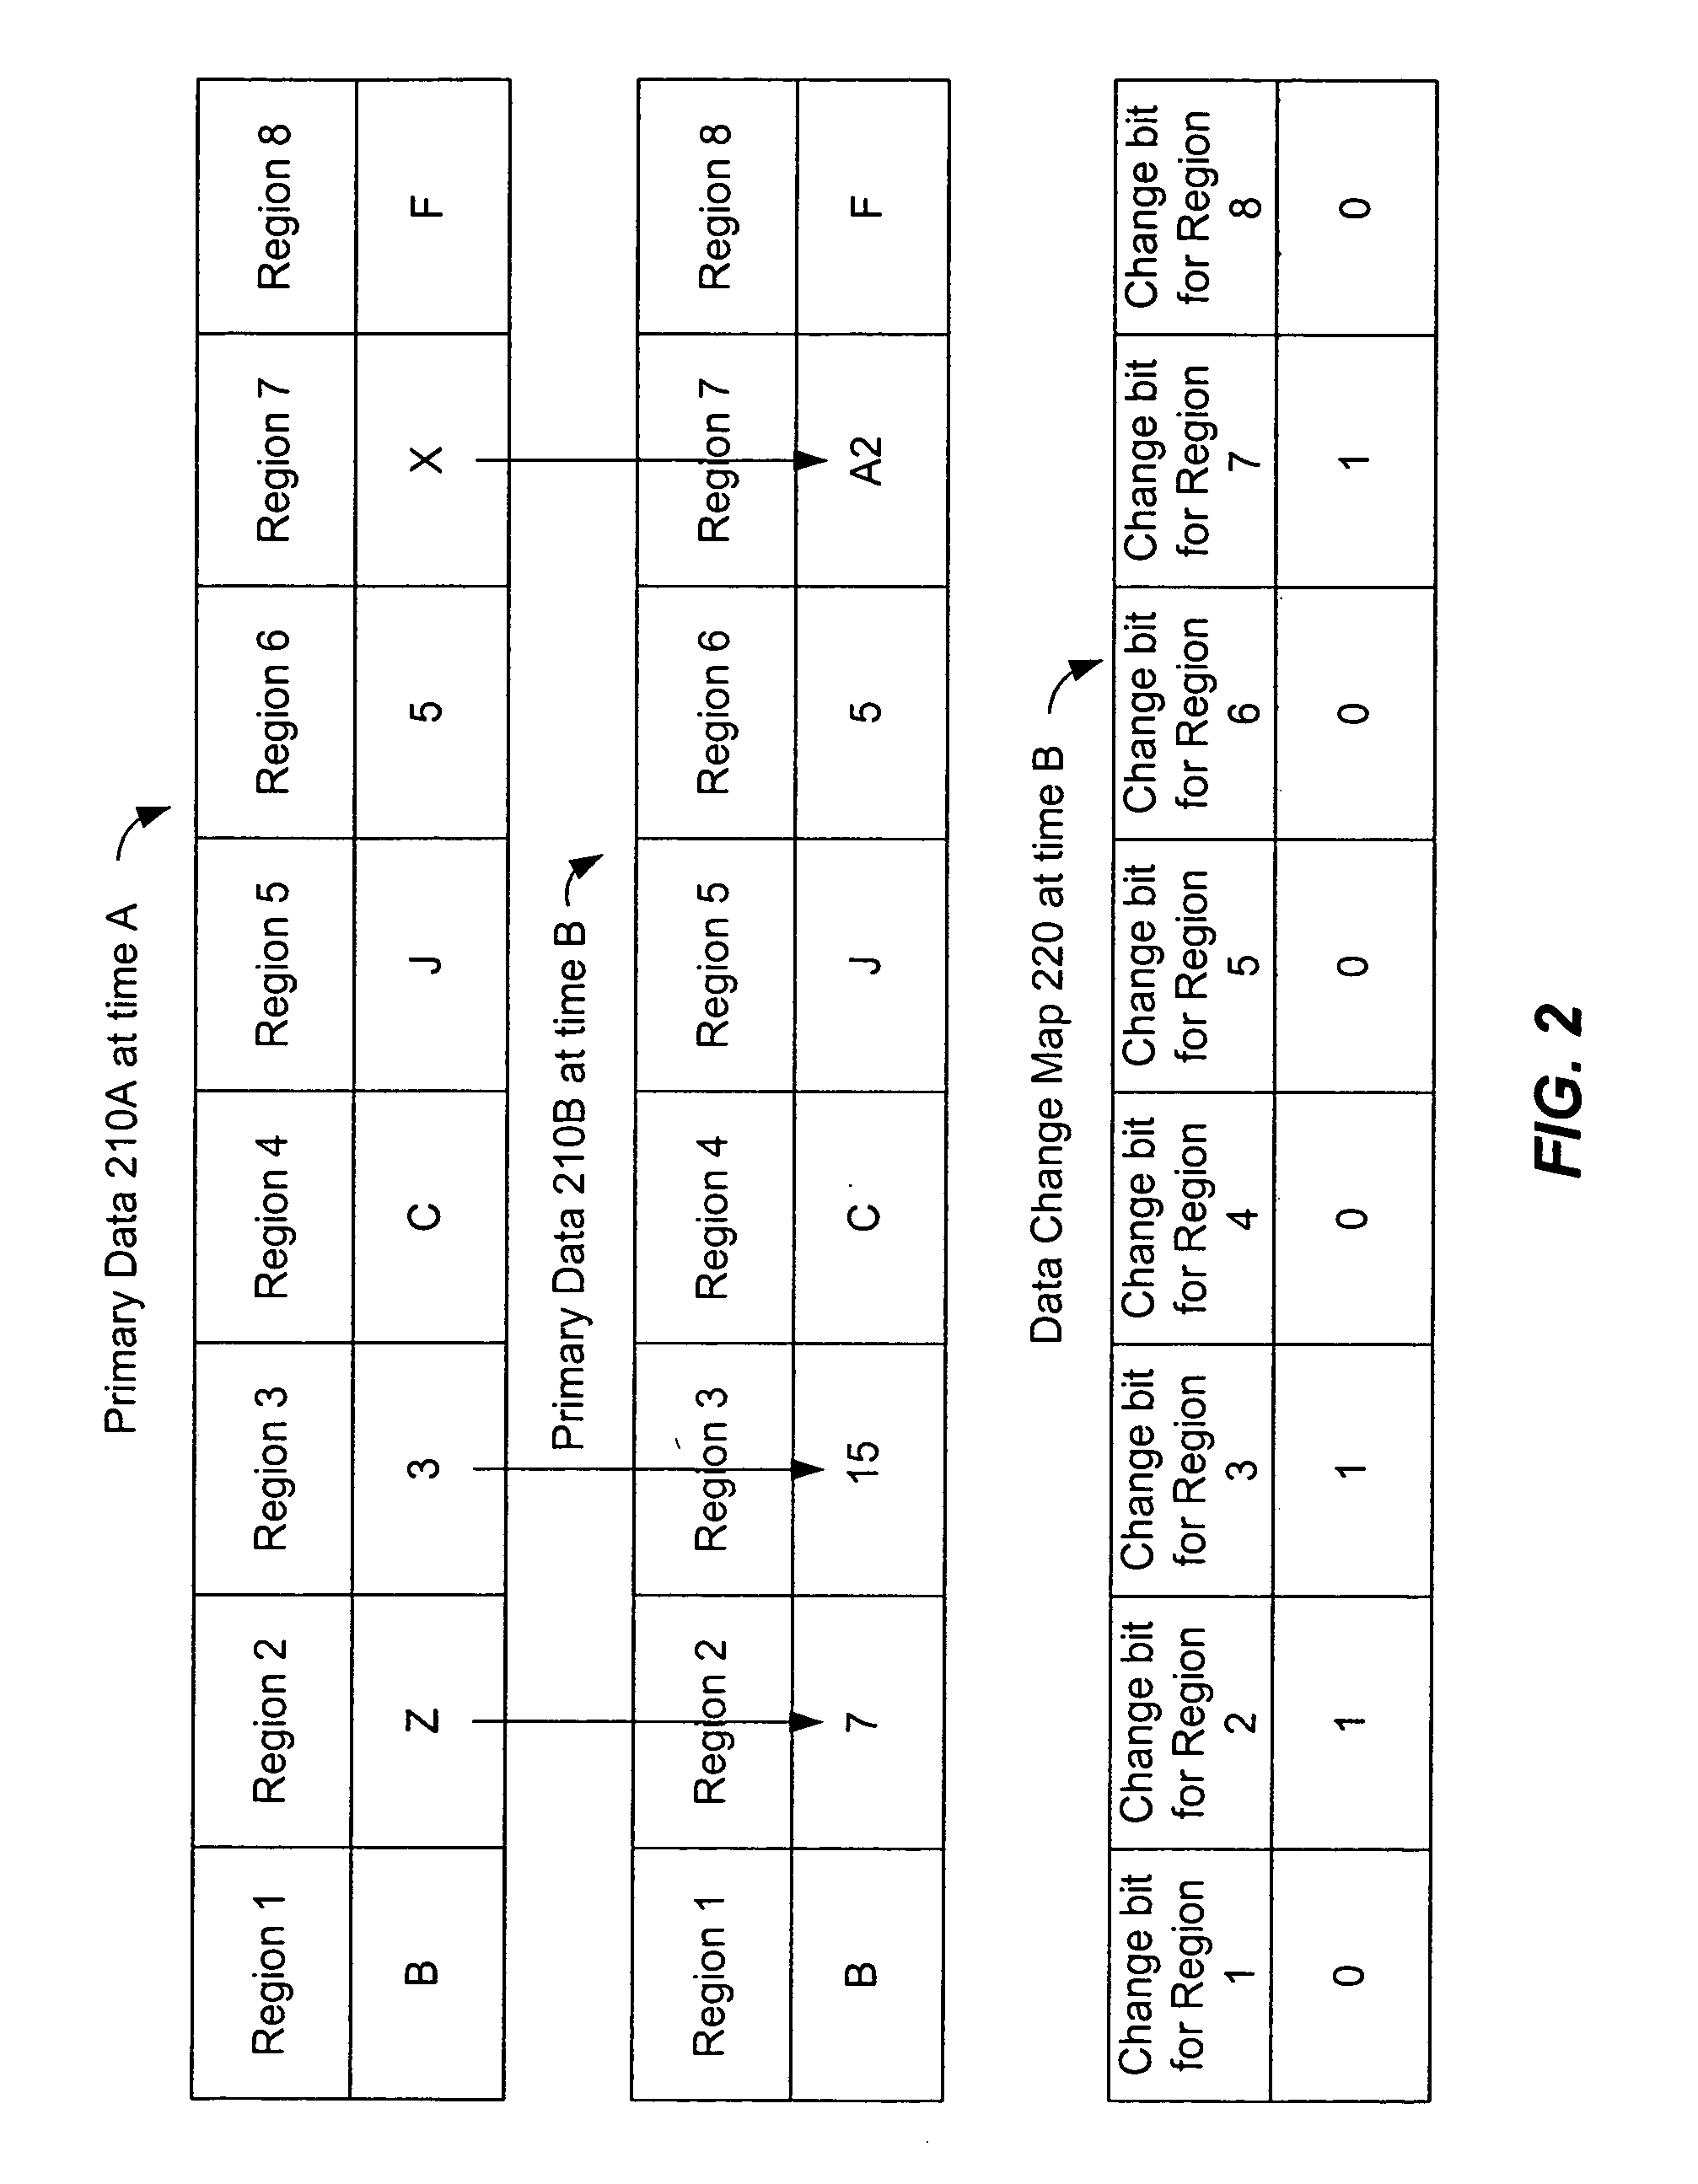 Performance of operations on selected data in a storage area